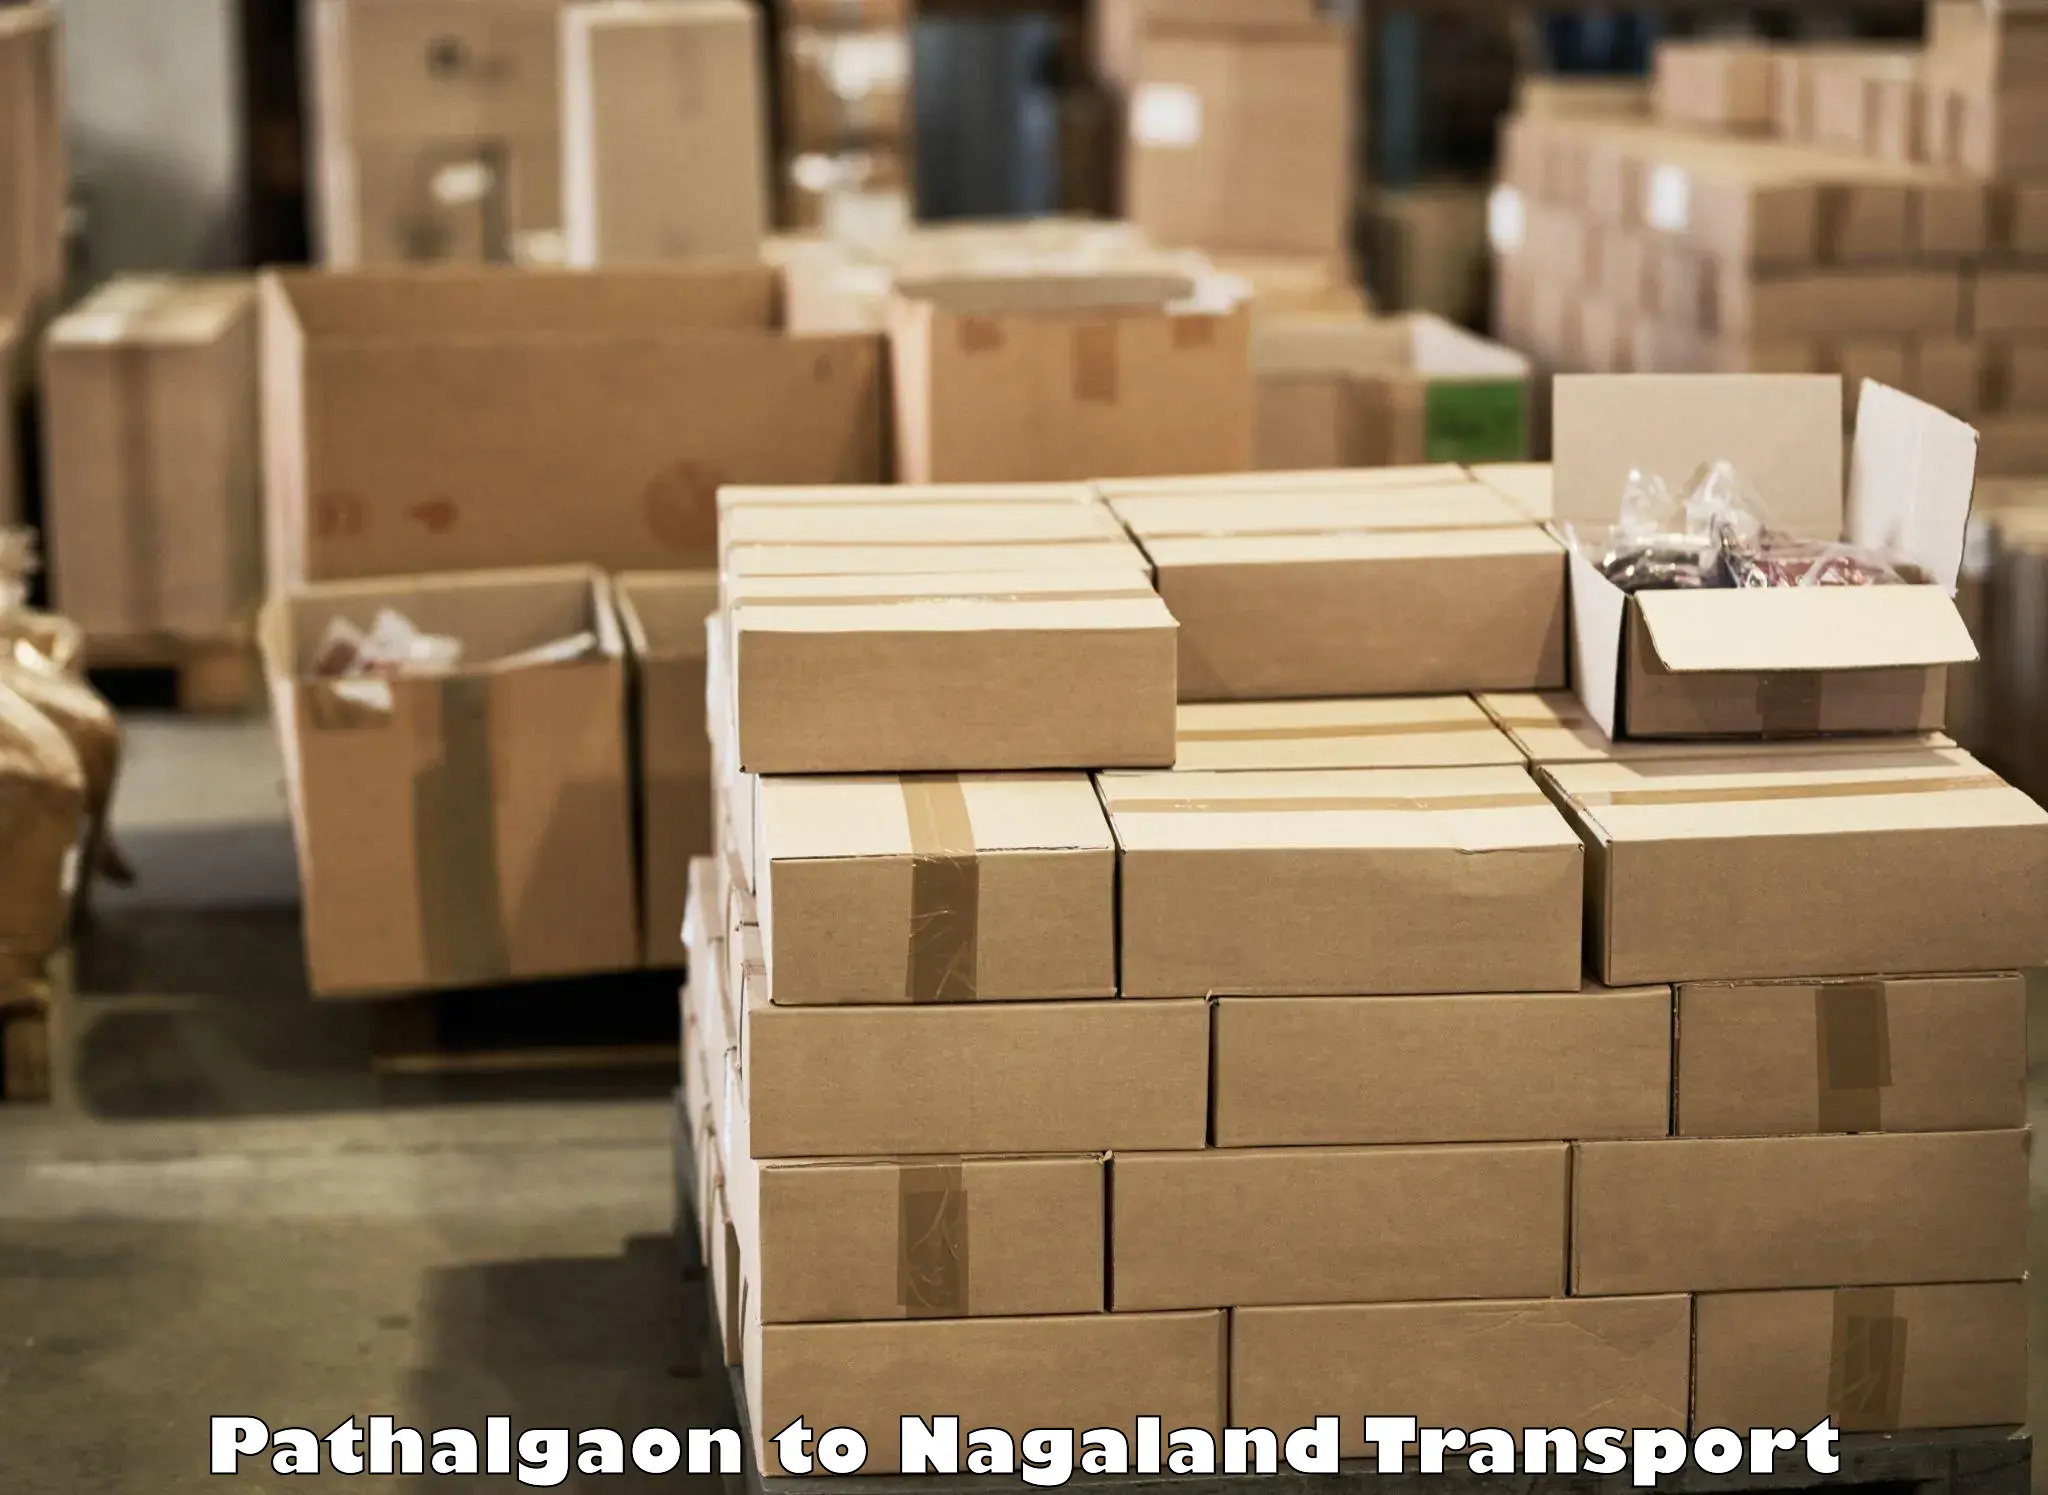 Vehicle transport services in Pathalgaon to Nagaland